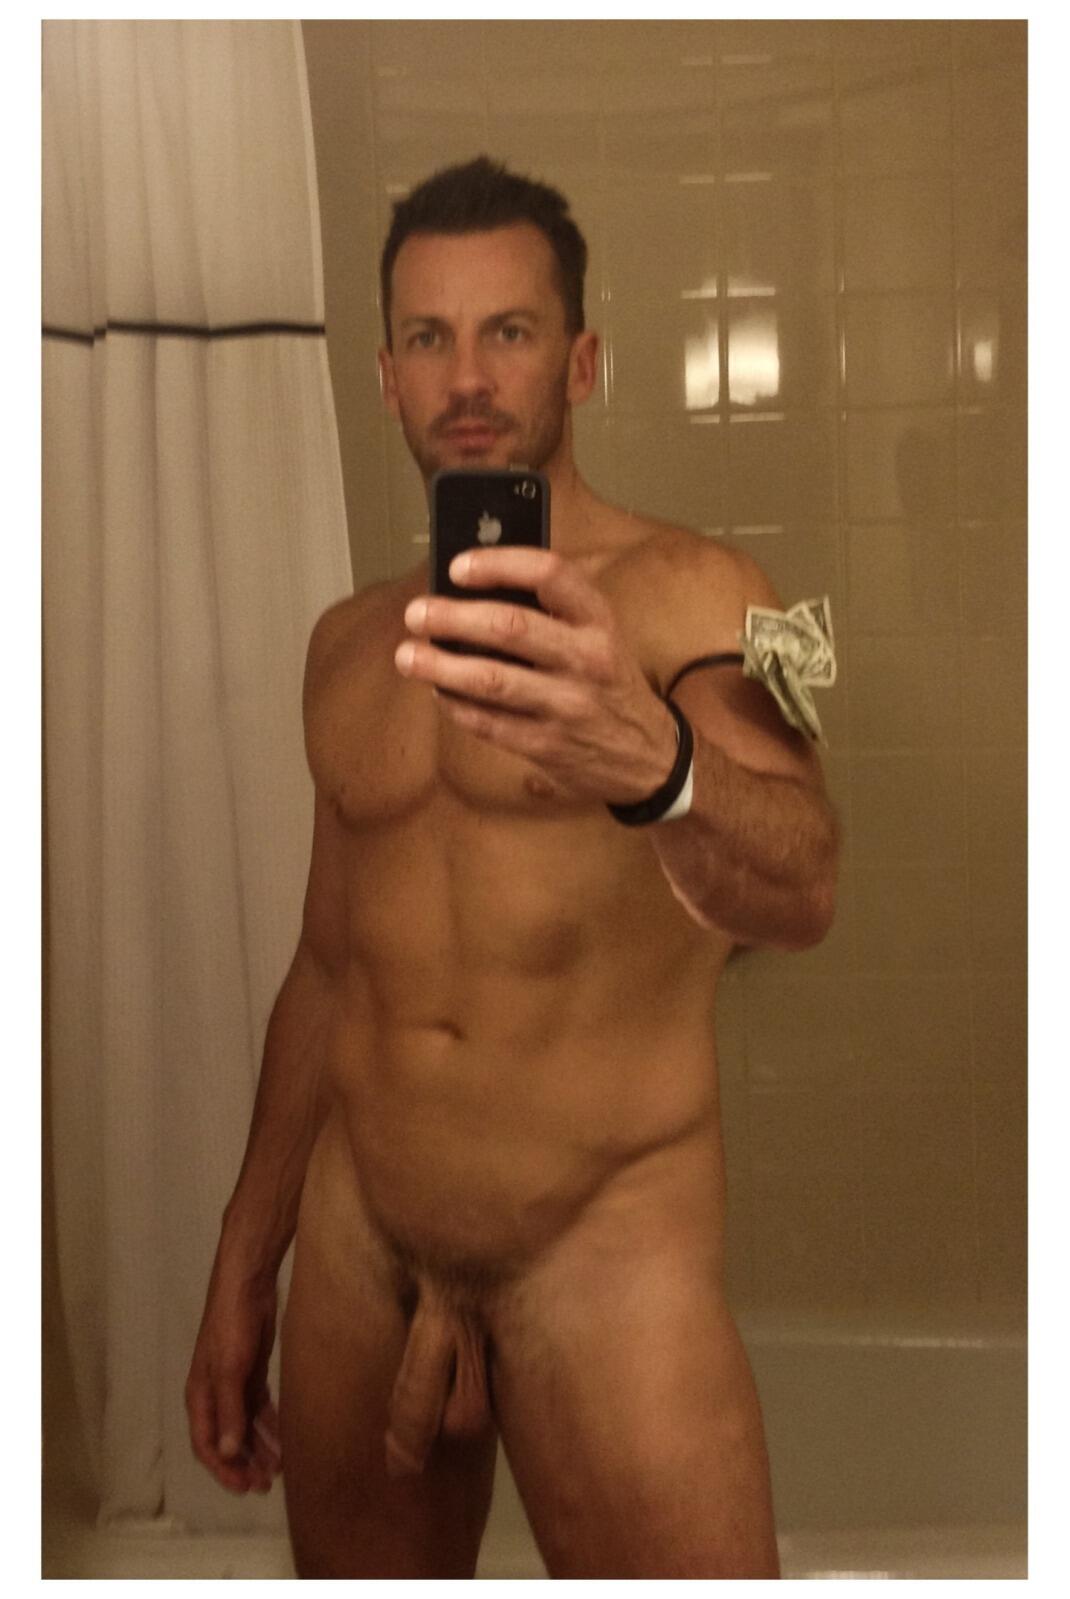 “Craig Parker, actor from Spartacus naked” .